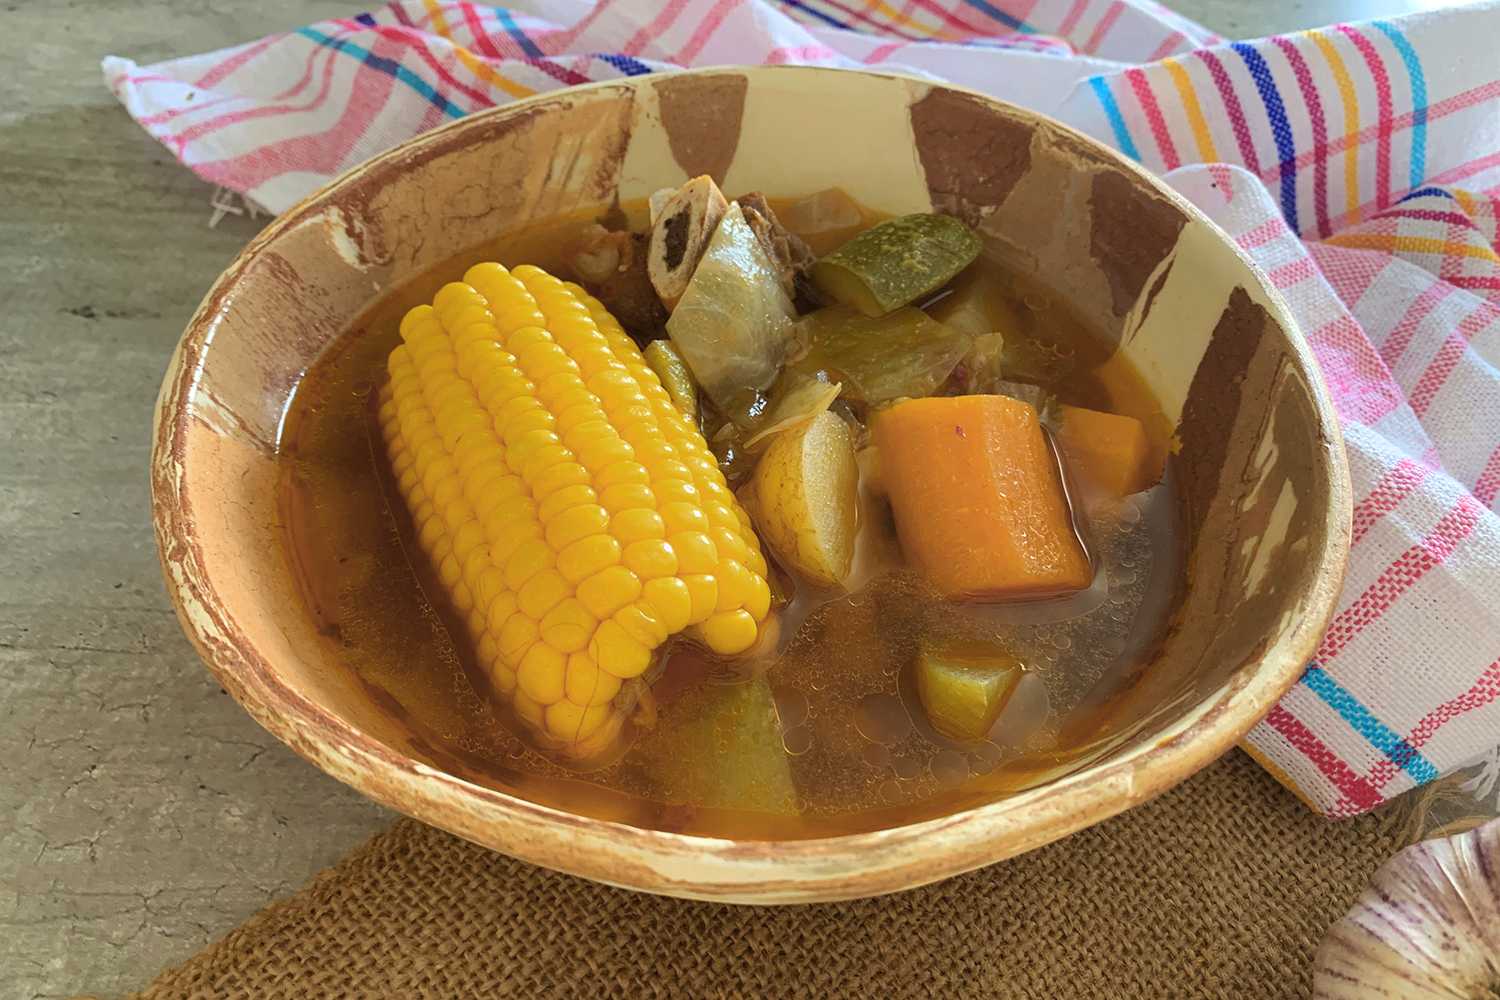 Clear soup with corn ear, beef chunks and chopped carrot and zucchini in brown bowl